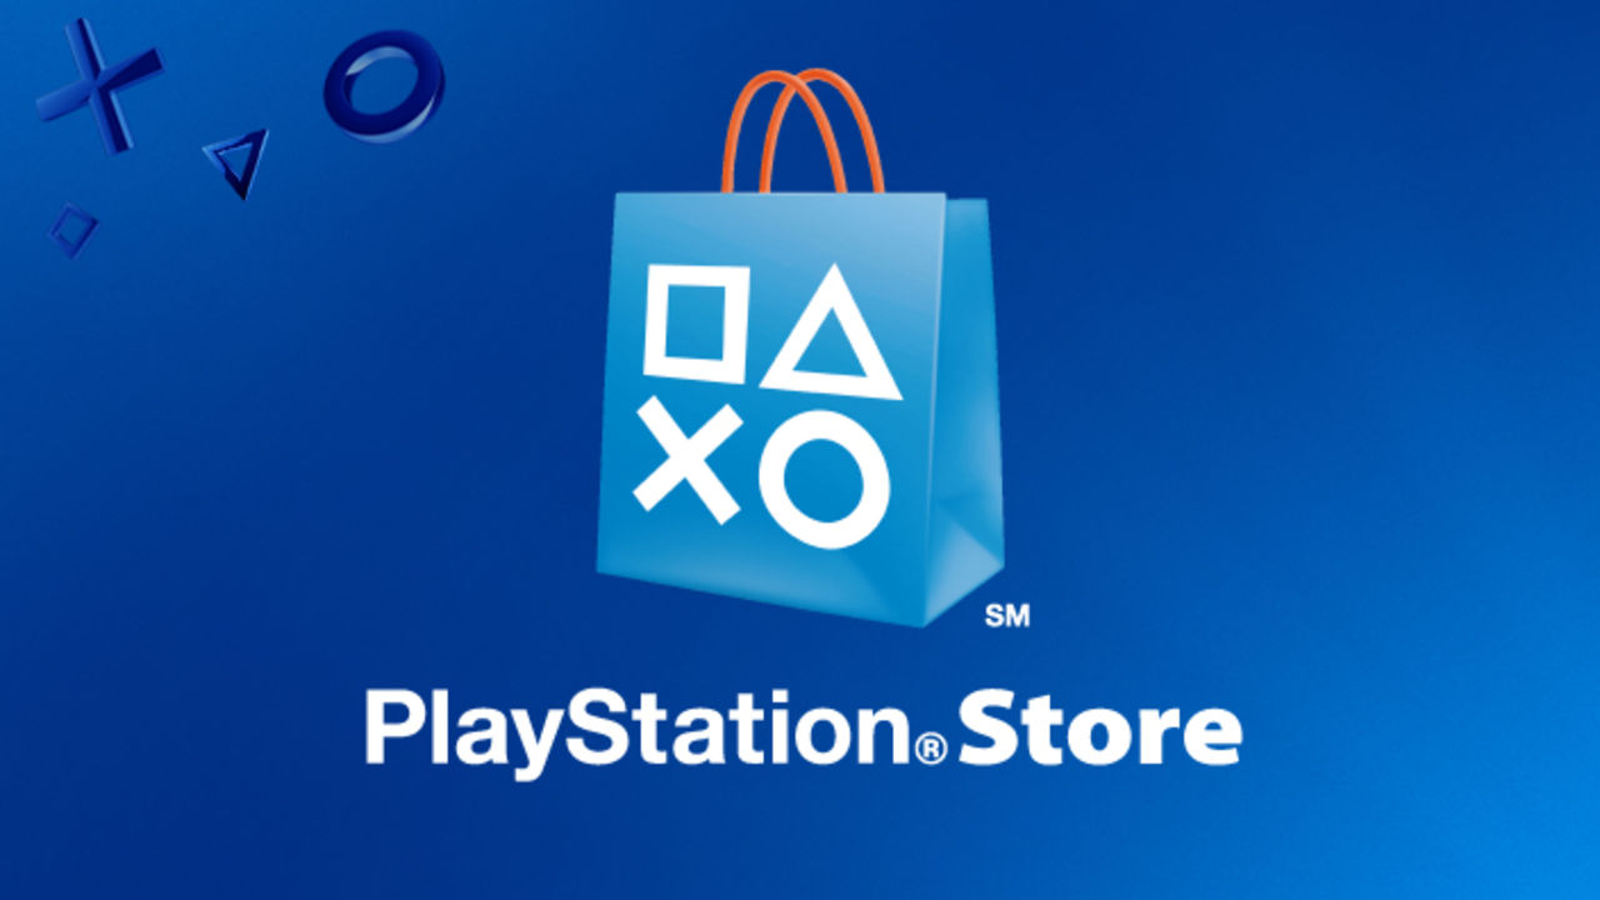 Sony Is Removing PayPal, Credit Card Support for PS3 and PS Vita Stores